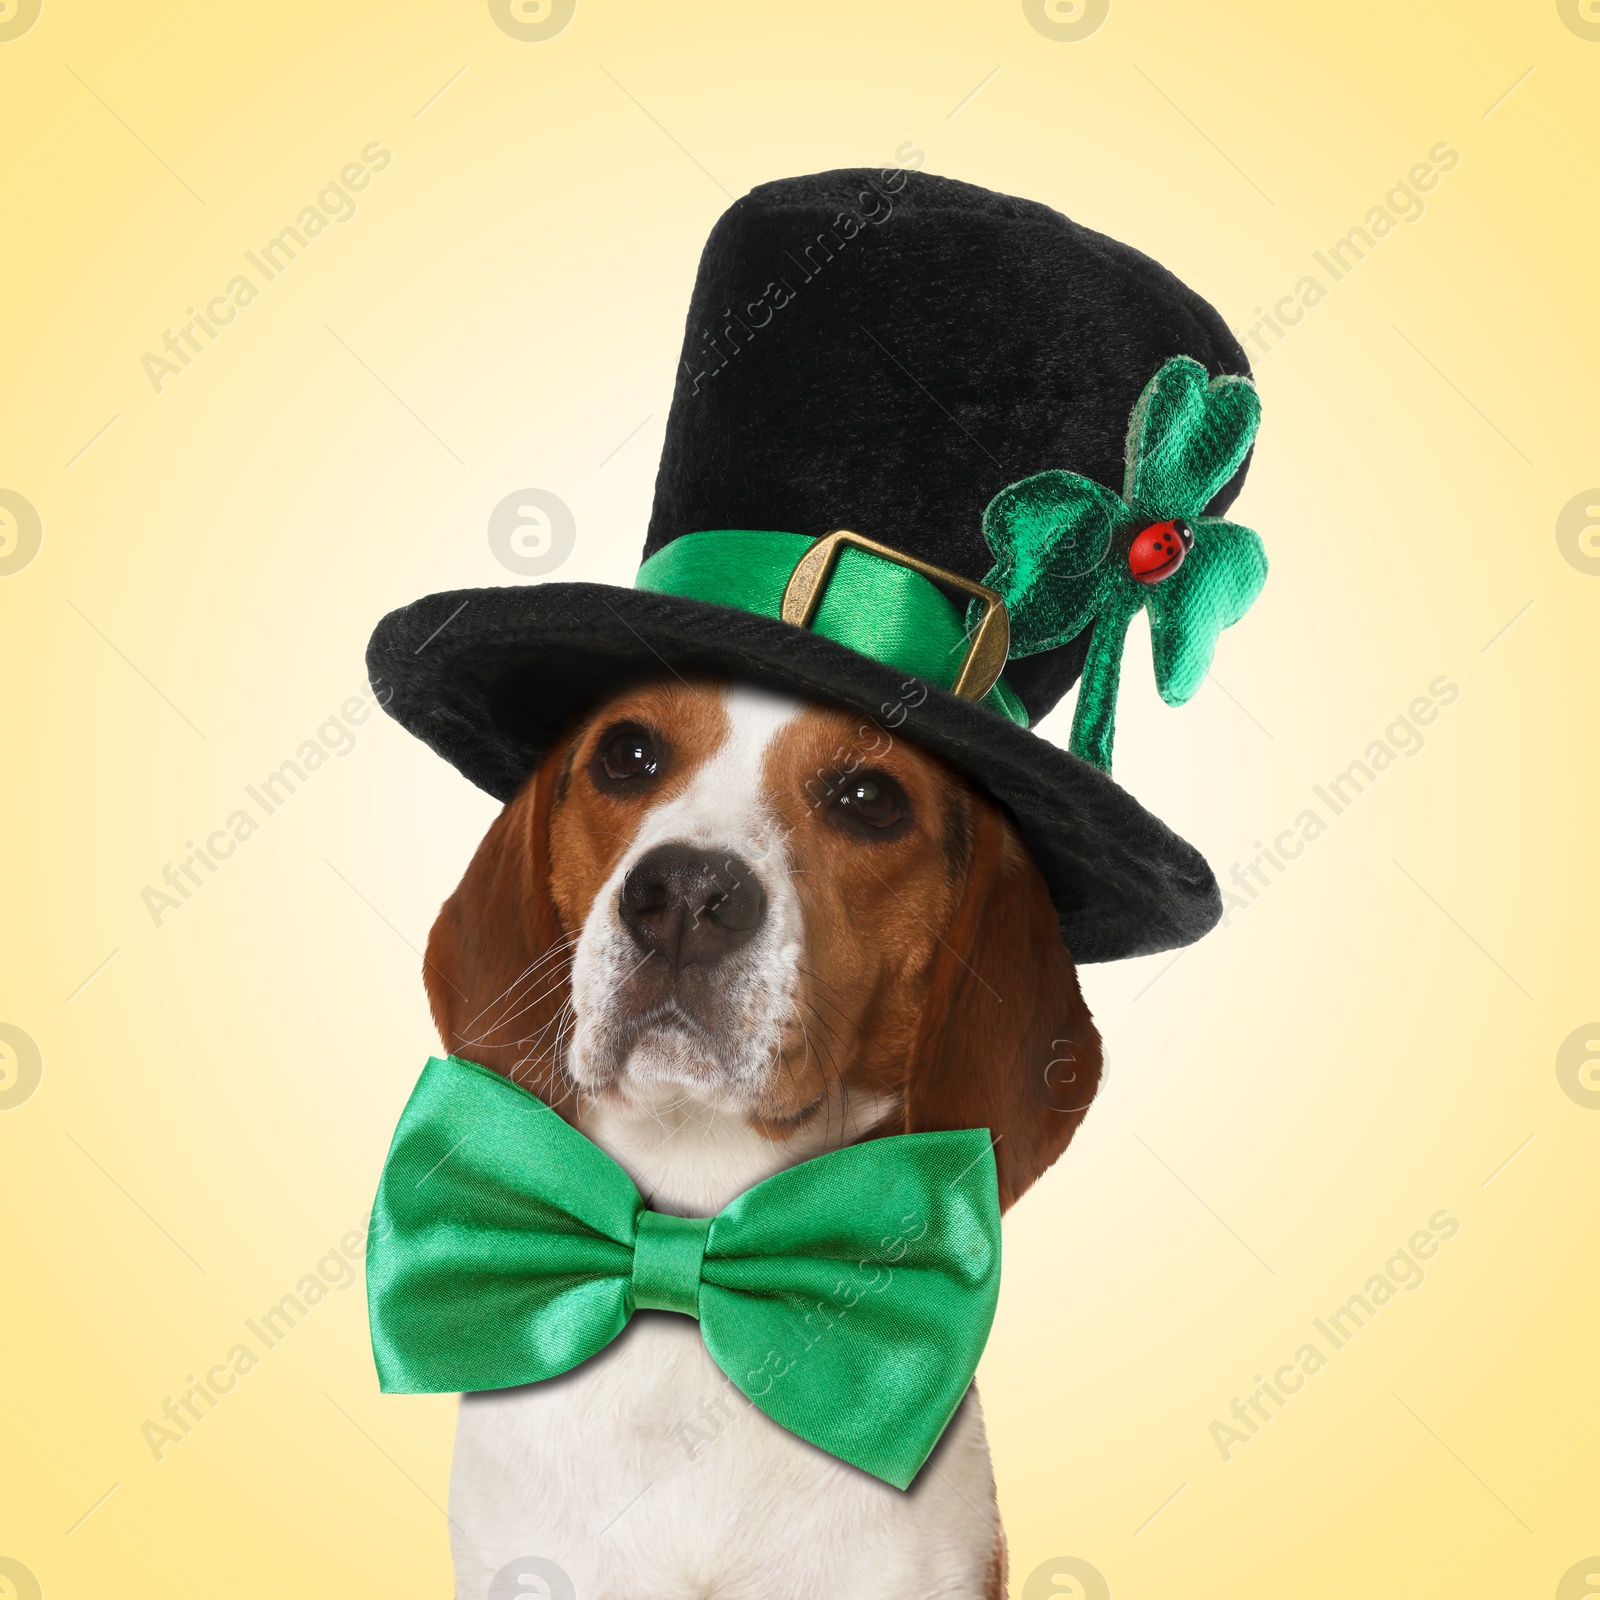 Image of St. Patrick's day celebration. Cute Beagle dog with green bow tie and leprechaun hat on yellow background